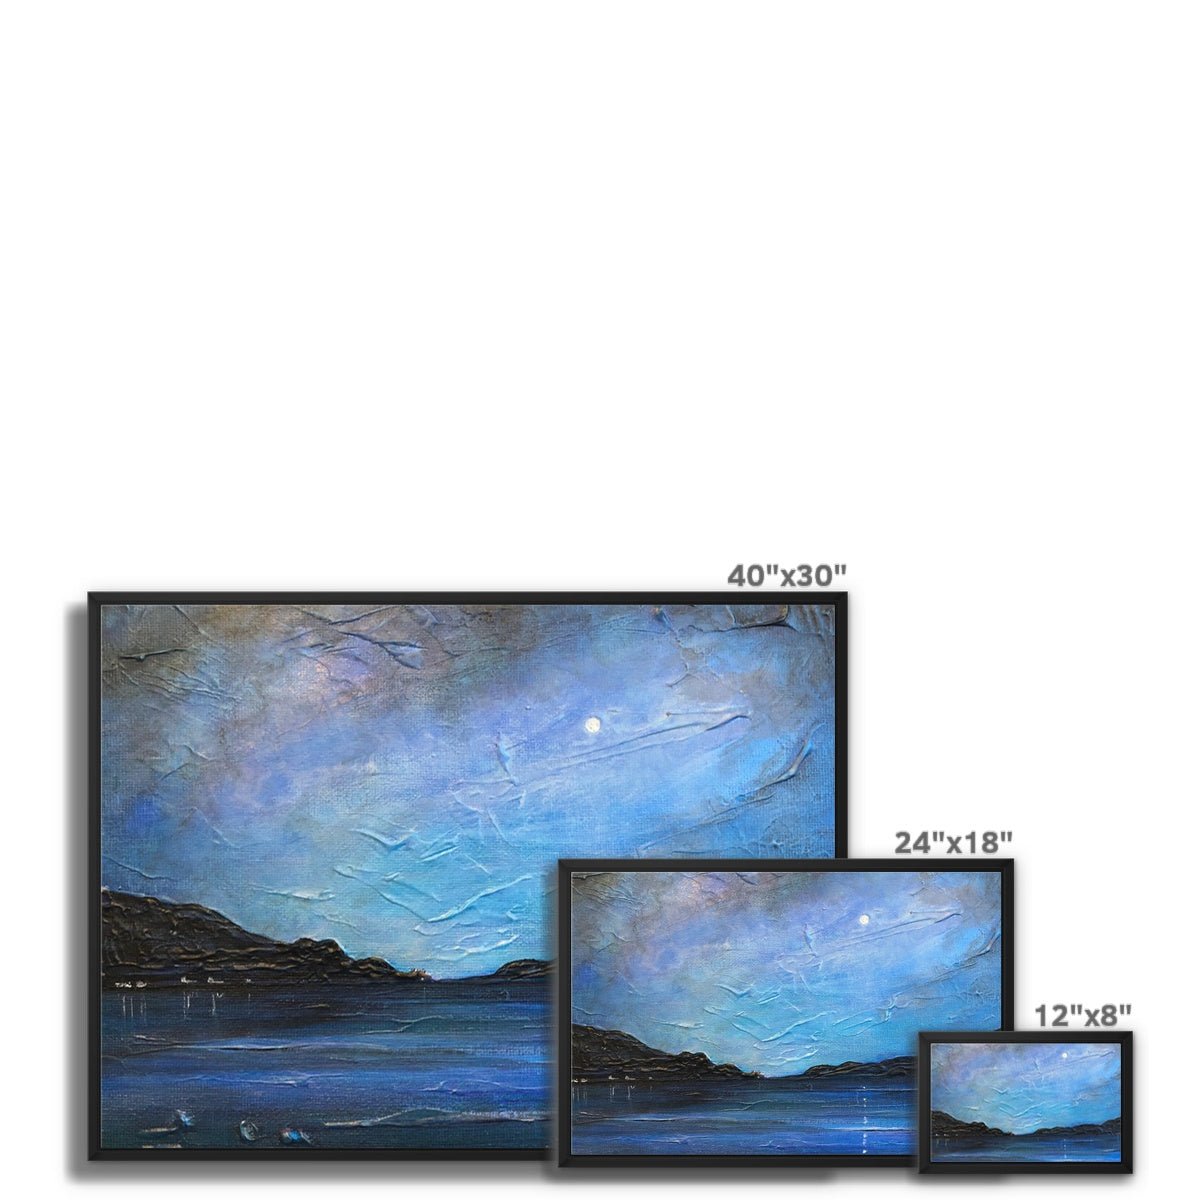 Loch Ness Moonlight Painting | Framed Canvas From Scotland-Floating Framed Canvas Prints-Scottish Lochs & Mountains Art Gallery-Paintings, Prints, Homeware, Art Gifts From Scotland By Scottish Artist Kevin Hunter